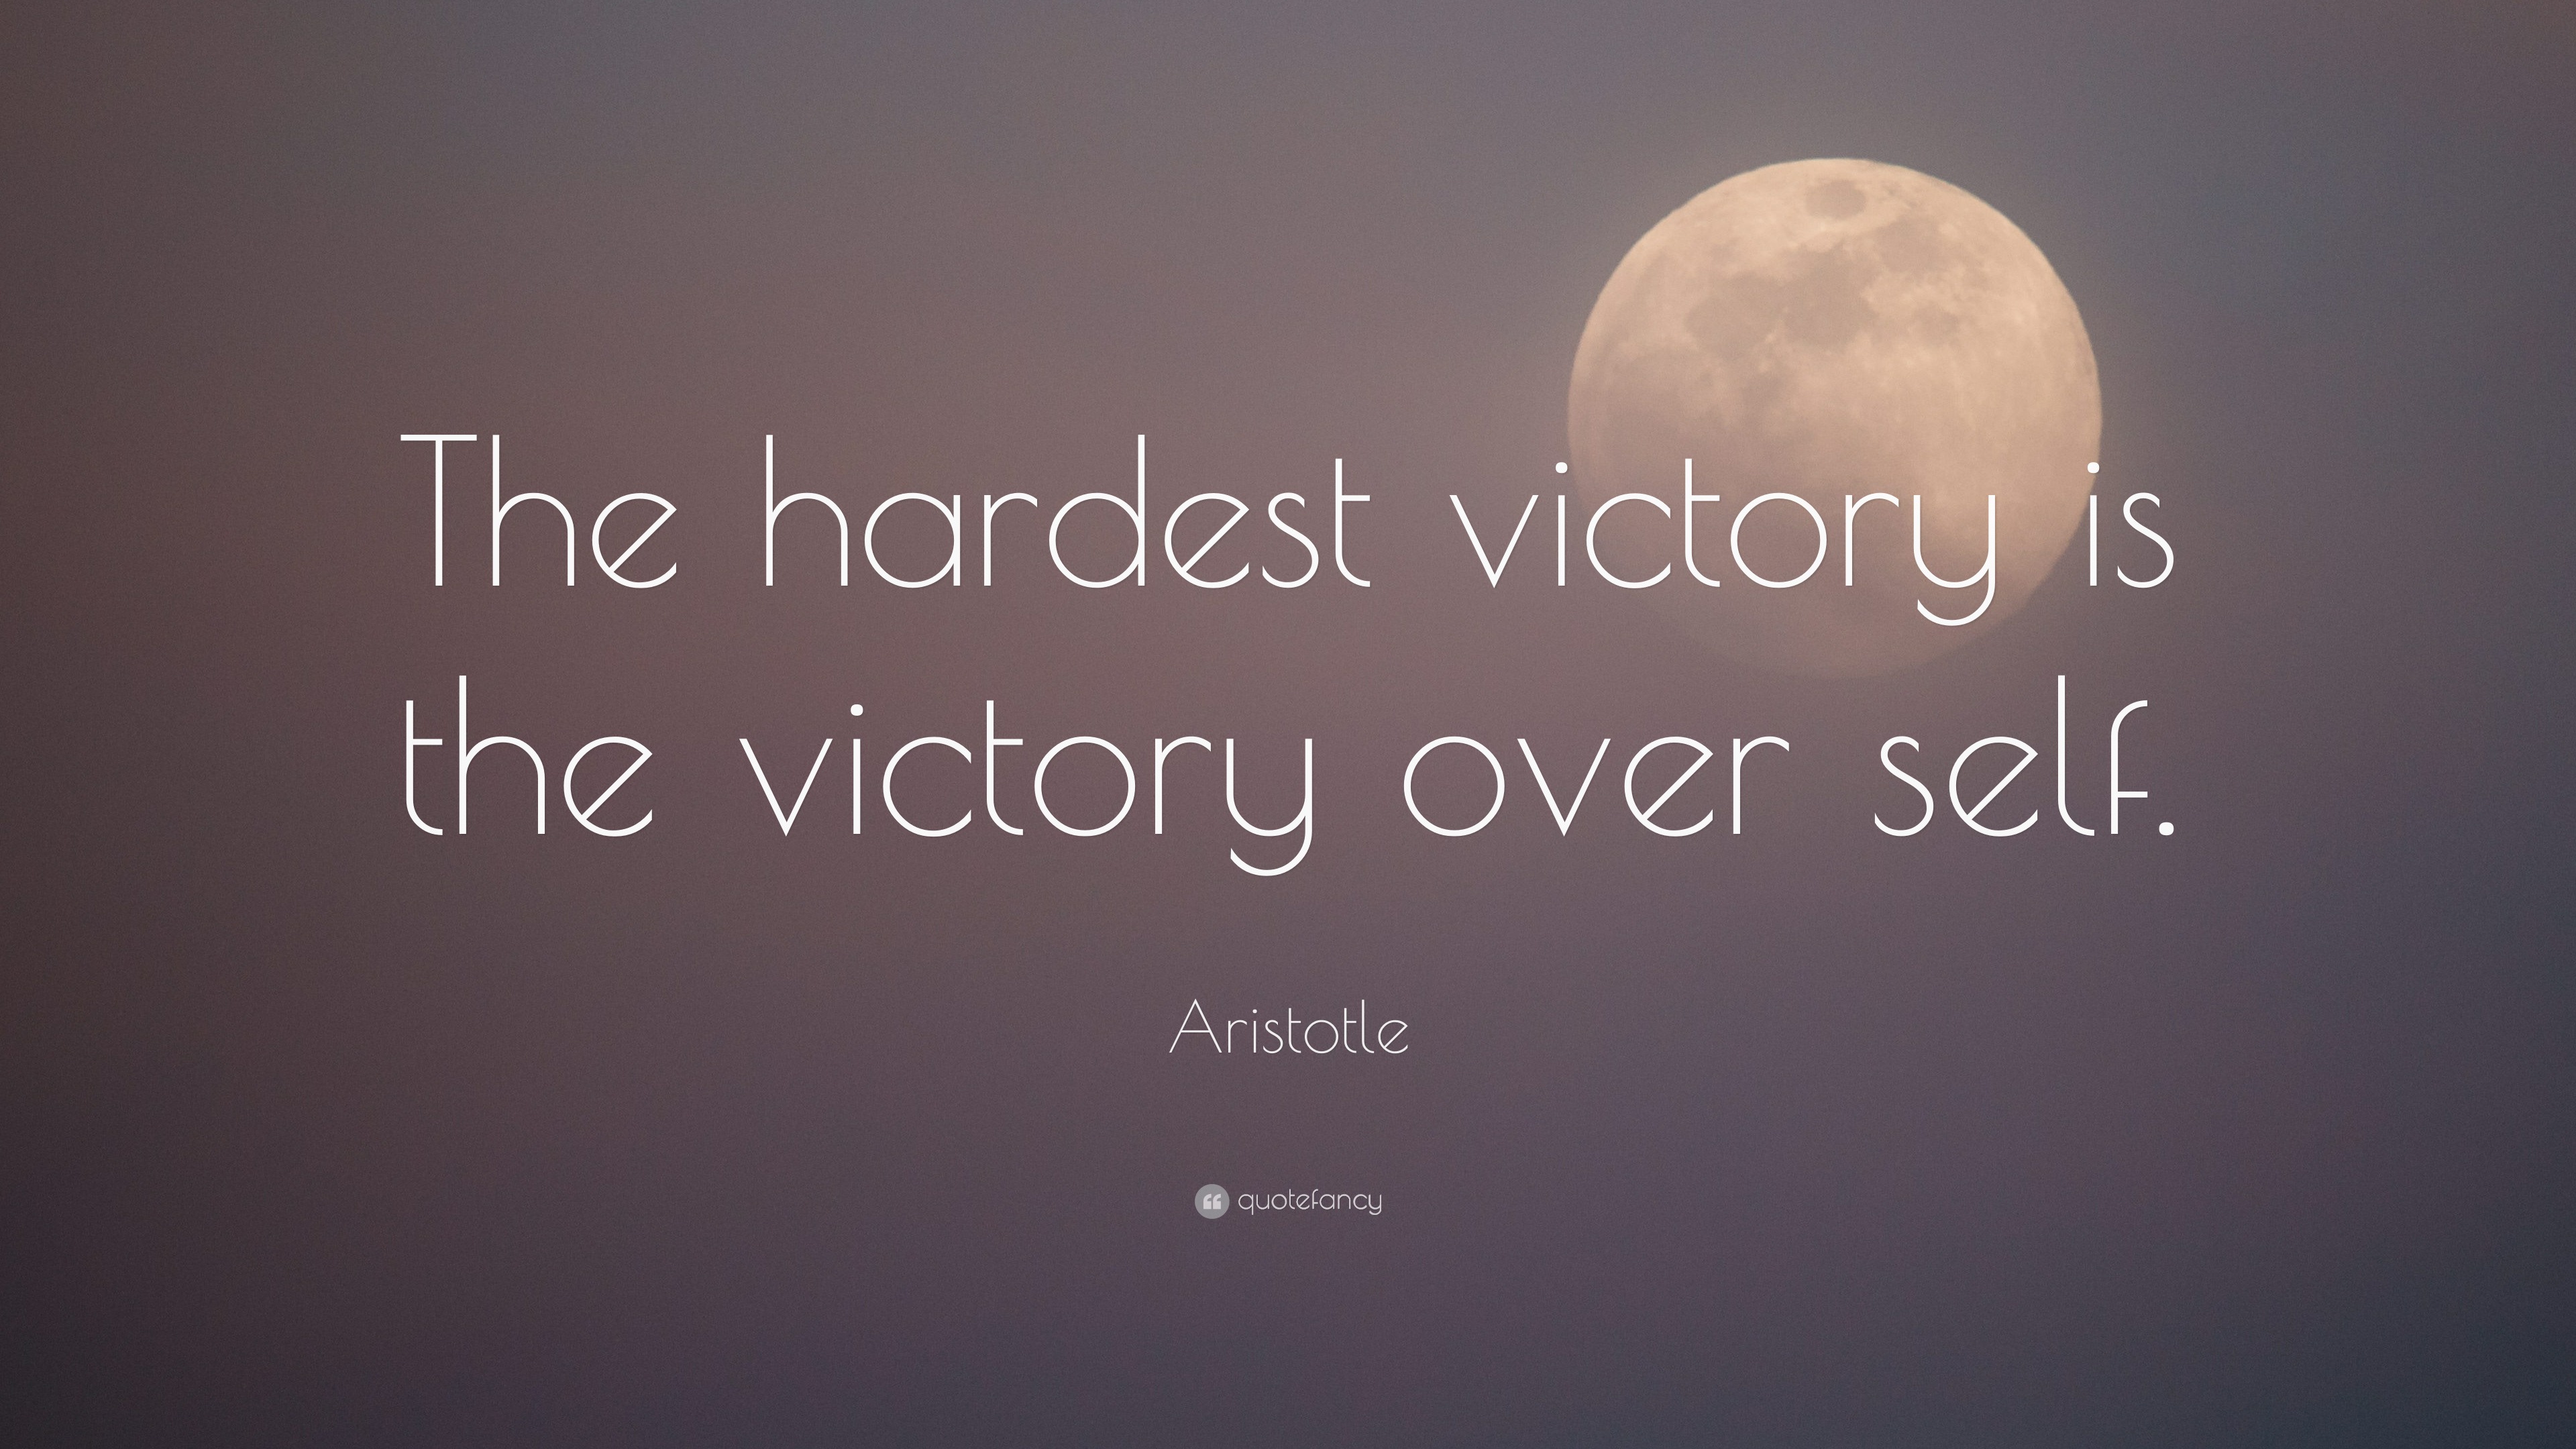 Aristotle Quote “The hardest victory is the victory over